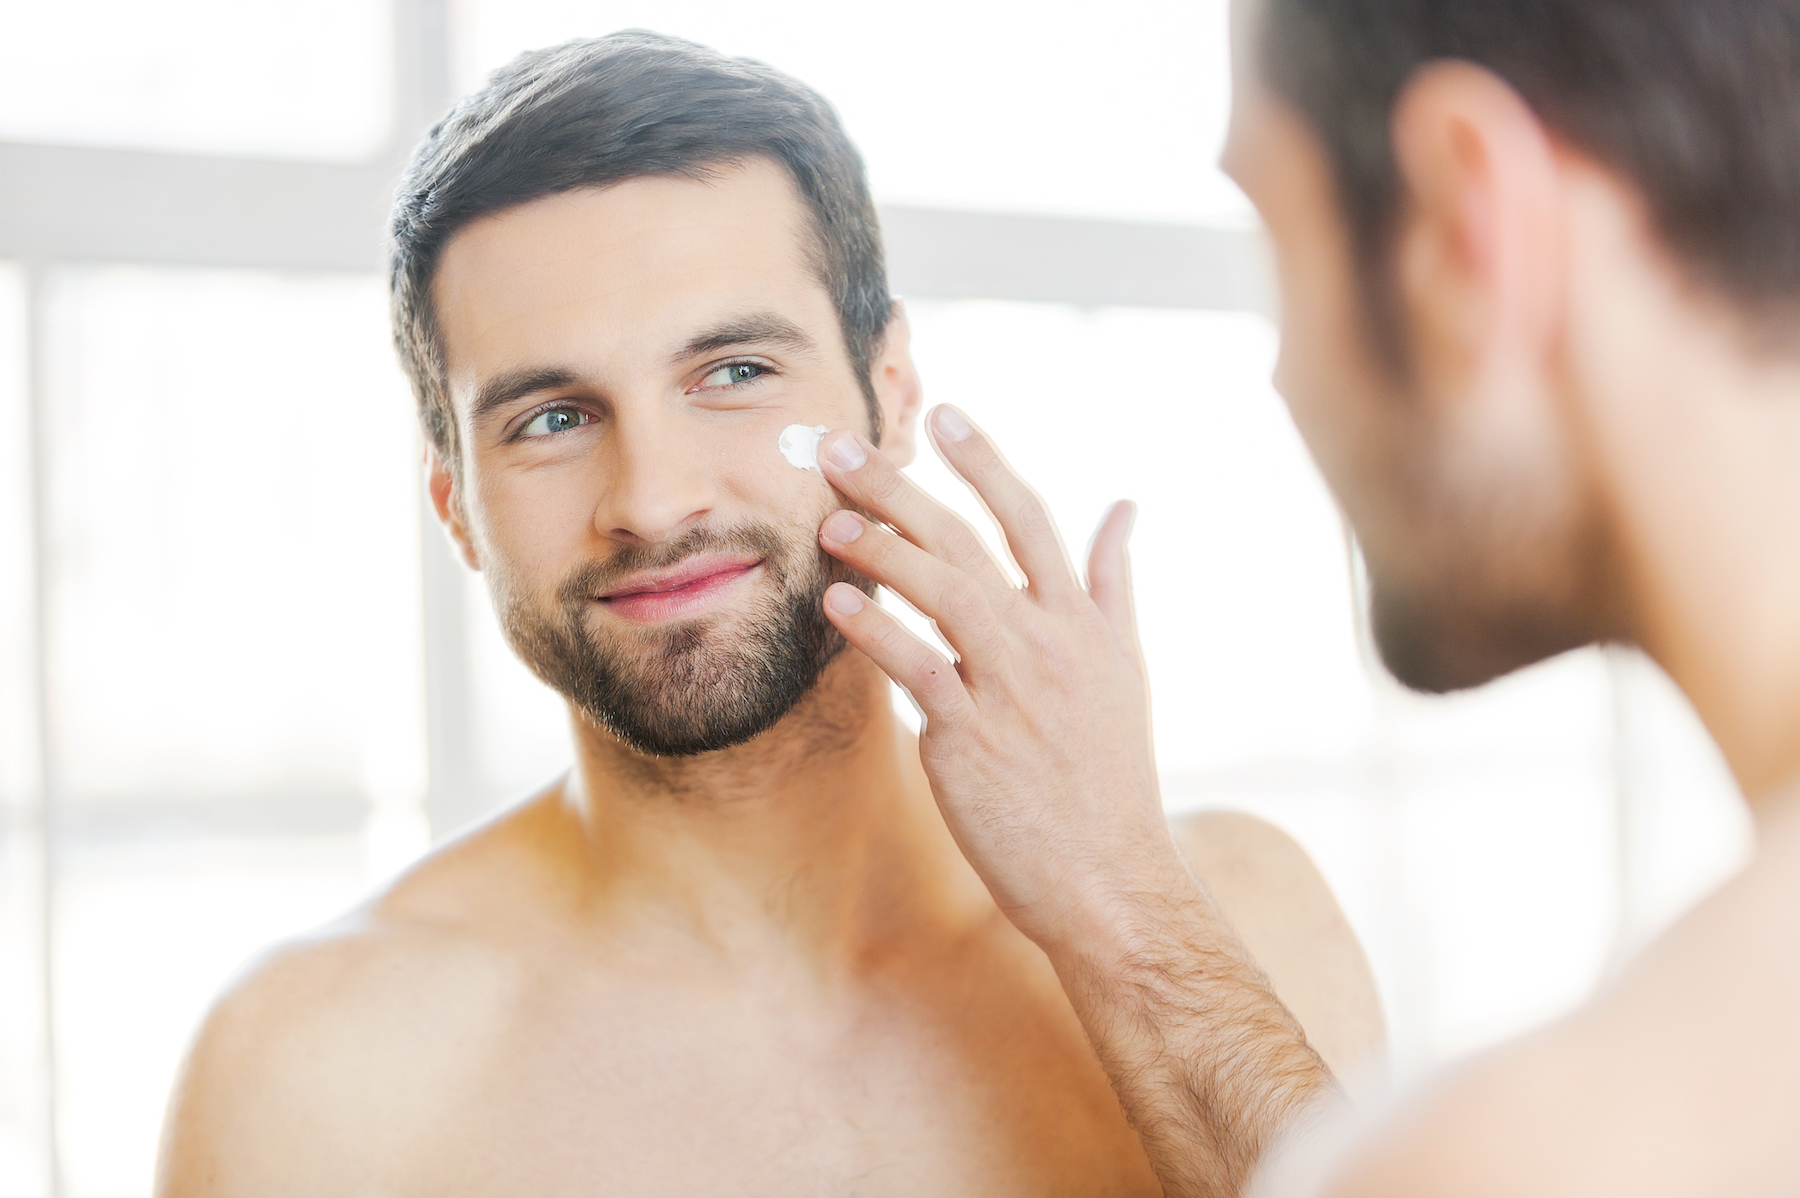 man applying skincare product to face in mirror